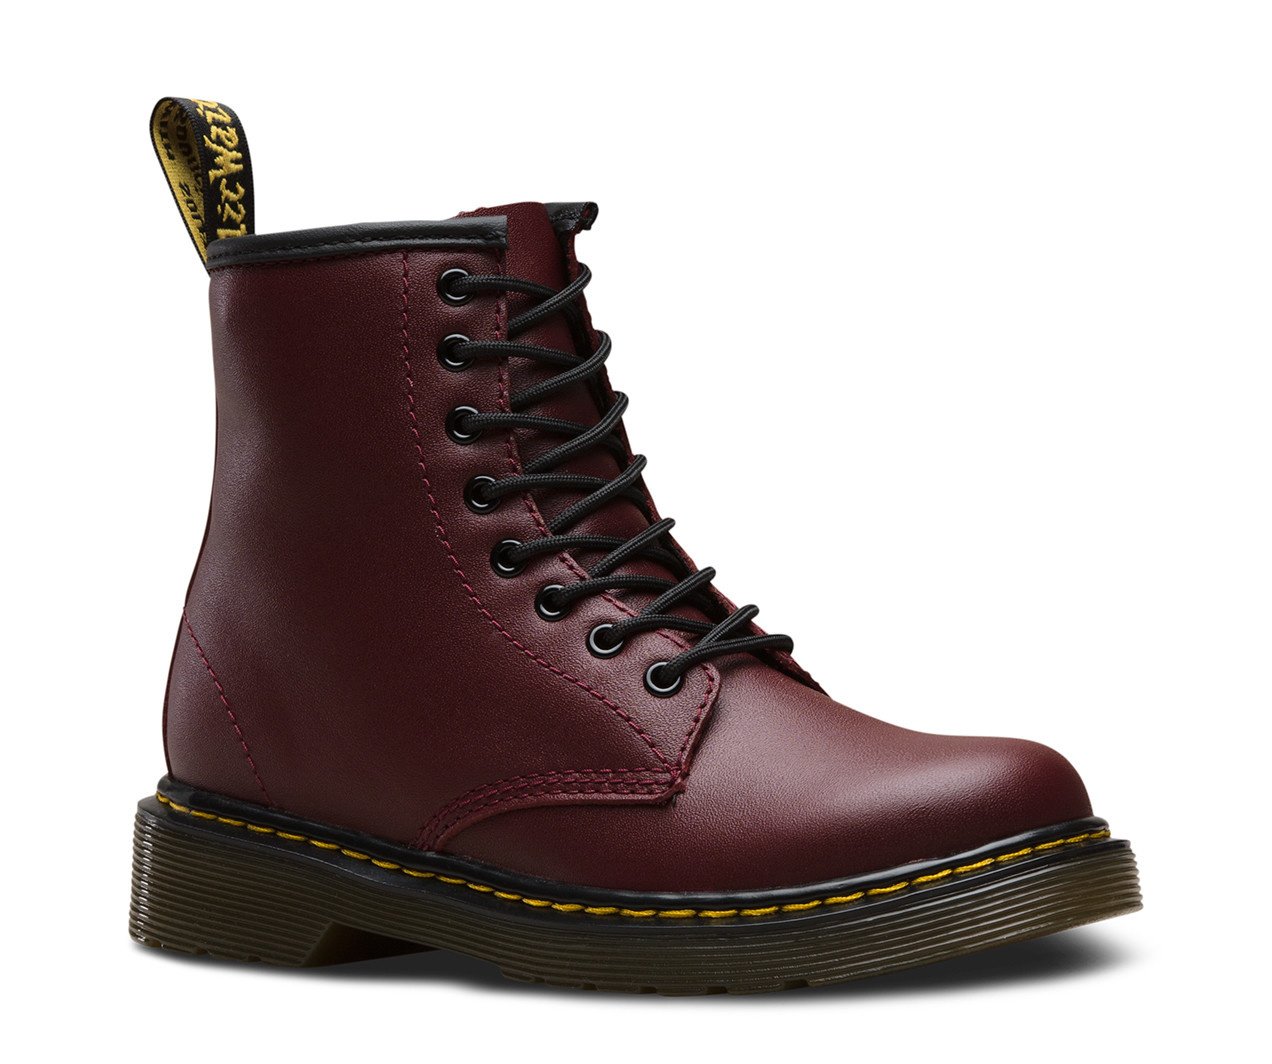 X20 RIO Montreal Dr Martens Canada, footwear Boots4all - Boutique X20 MTL